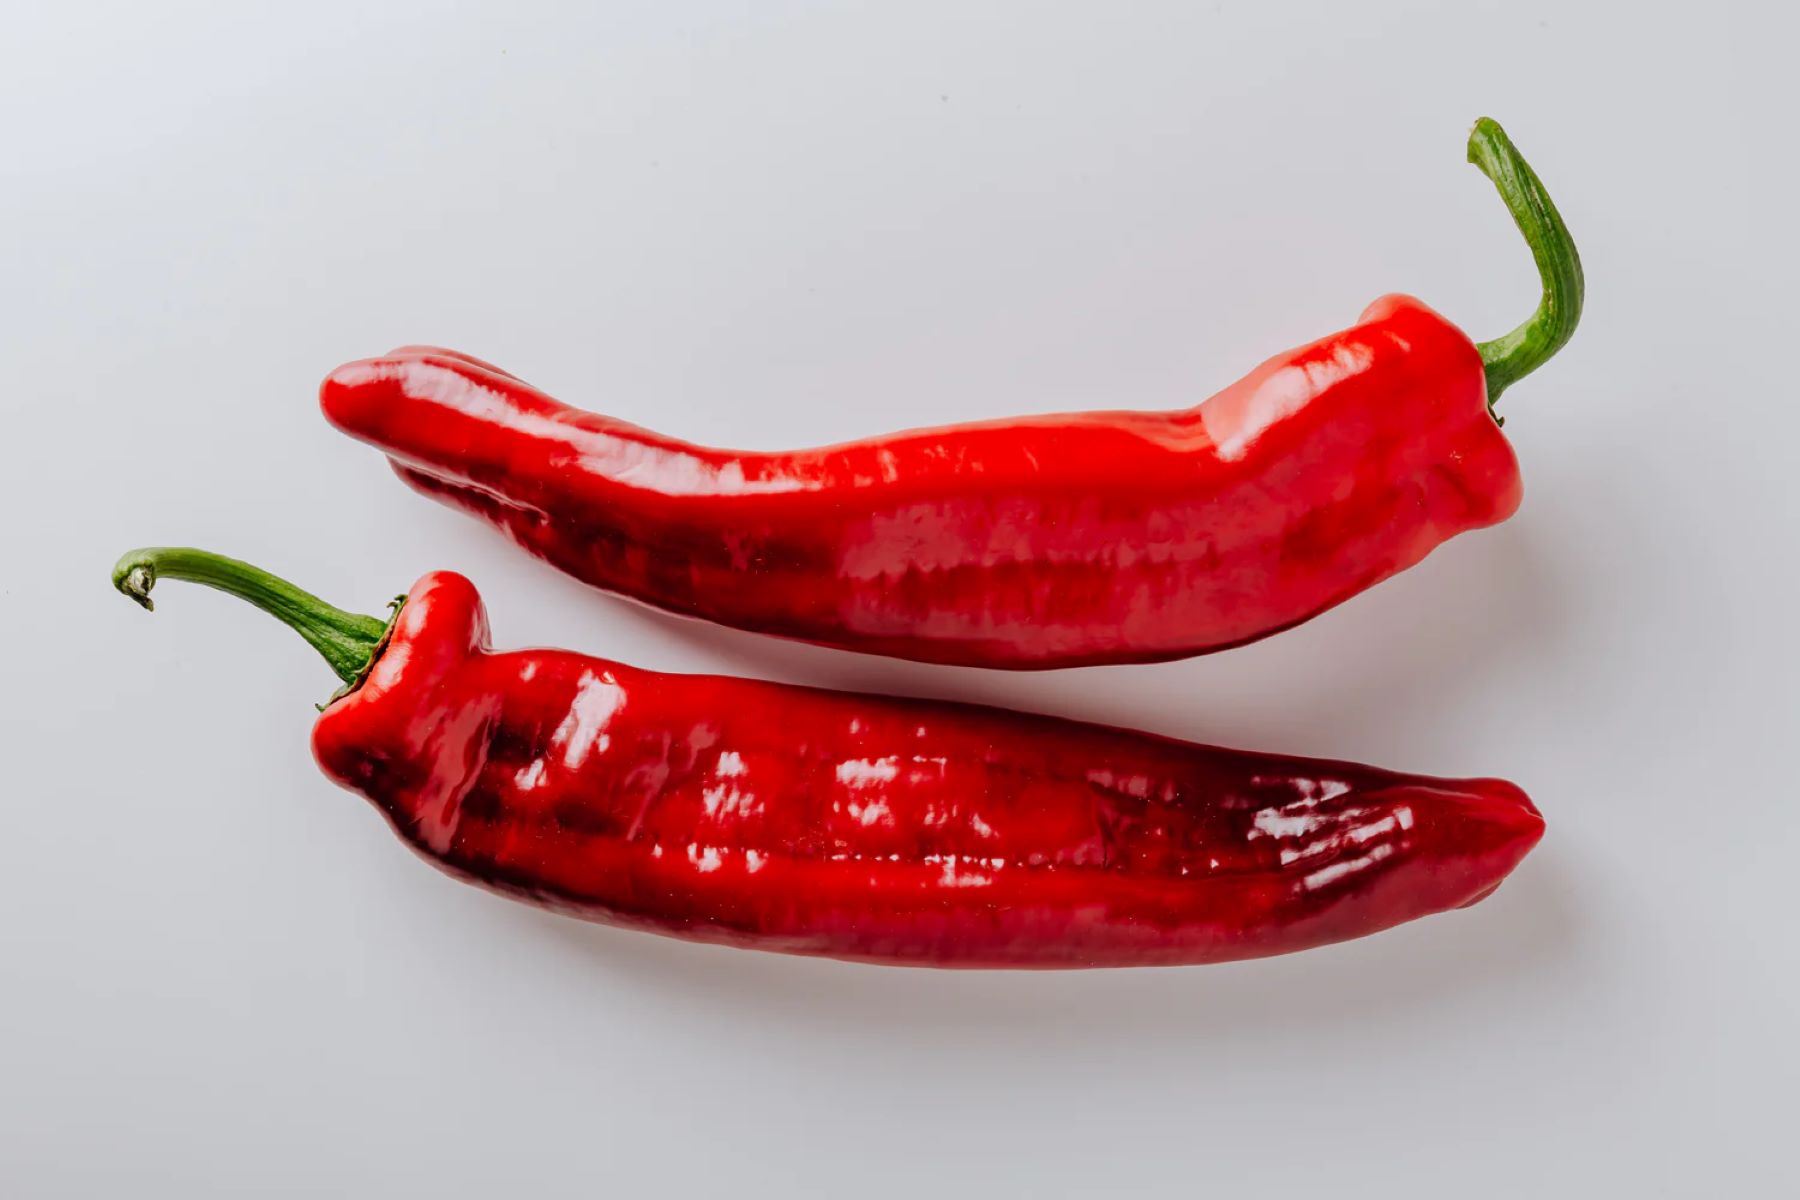 Surprising News: Chili And Type 2 Diabetes - A Perfect Match!